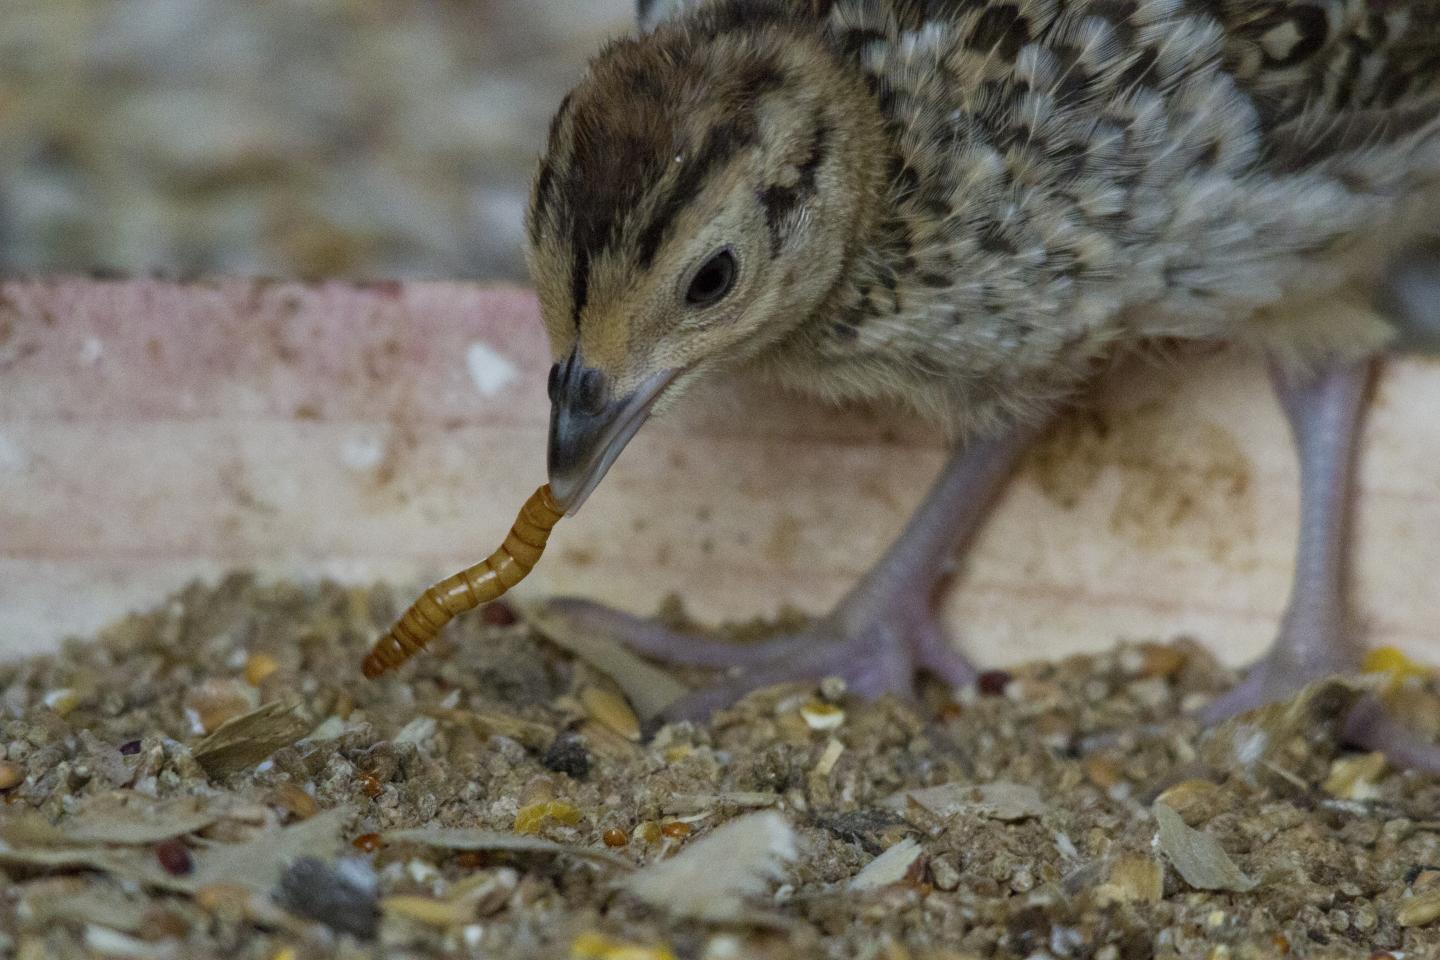 A Captive Pheasant Chick Eating a Mealworm